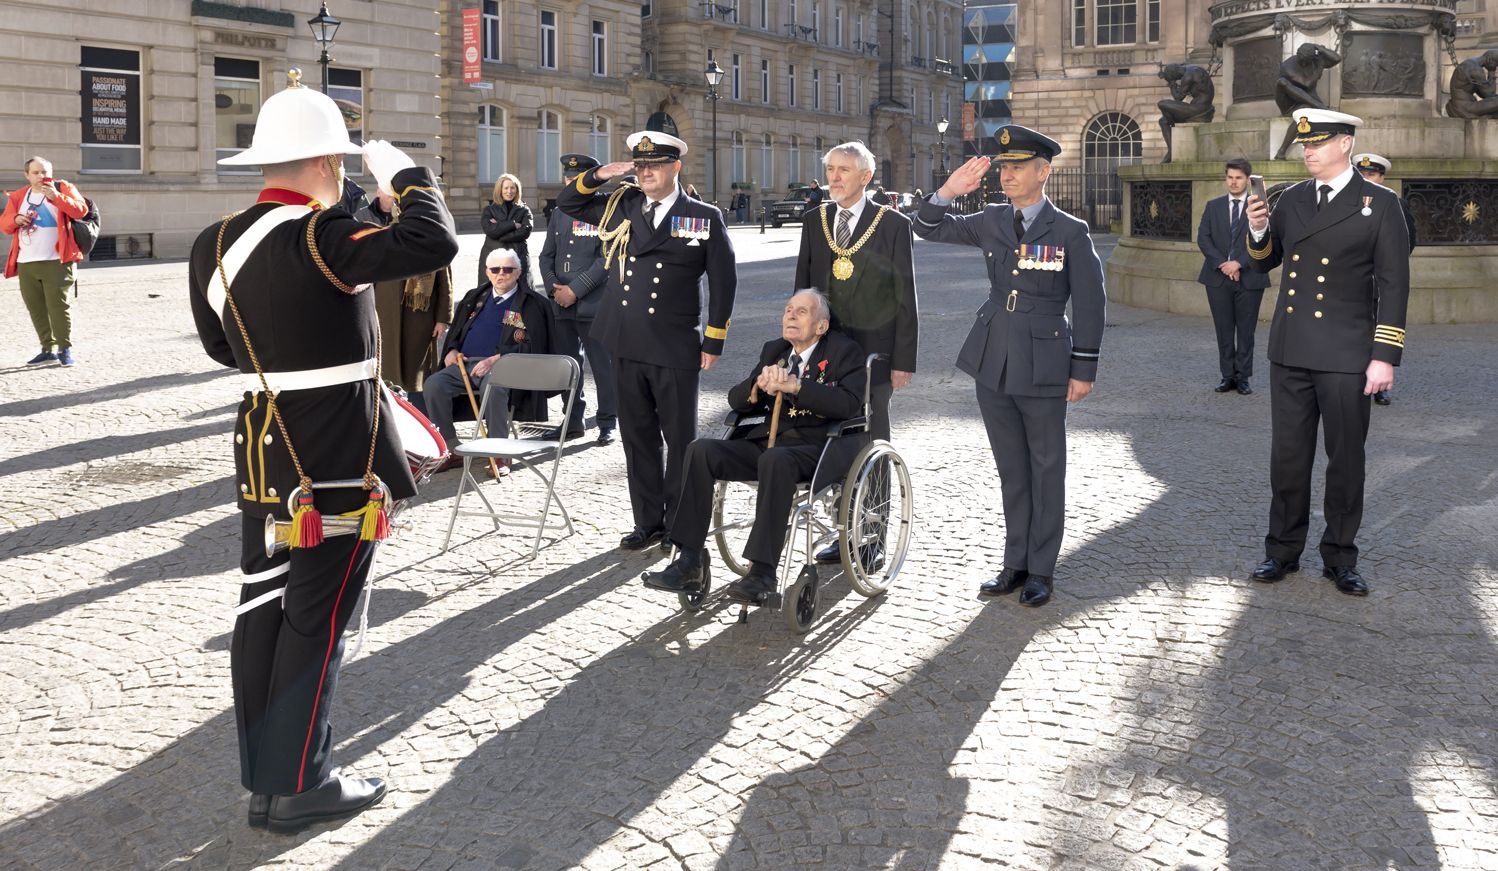 Veterans who served during the most decisive and long fought battle of the Second World War  the Battle of the Atlantic  were the guests of honour at an event in Liverpool to launch an 80-day countdown for the 80th Battle of the Atlantic commemorations